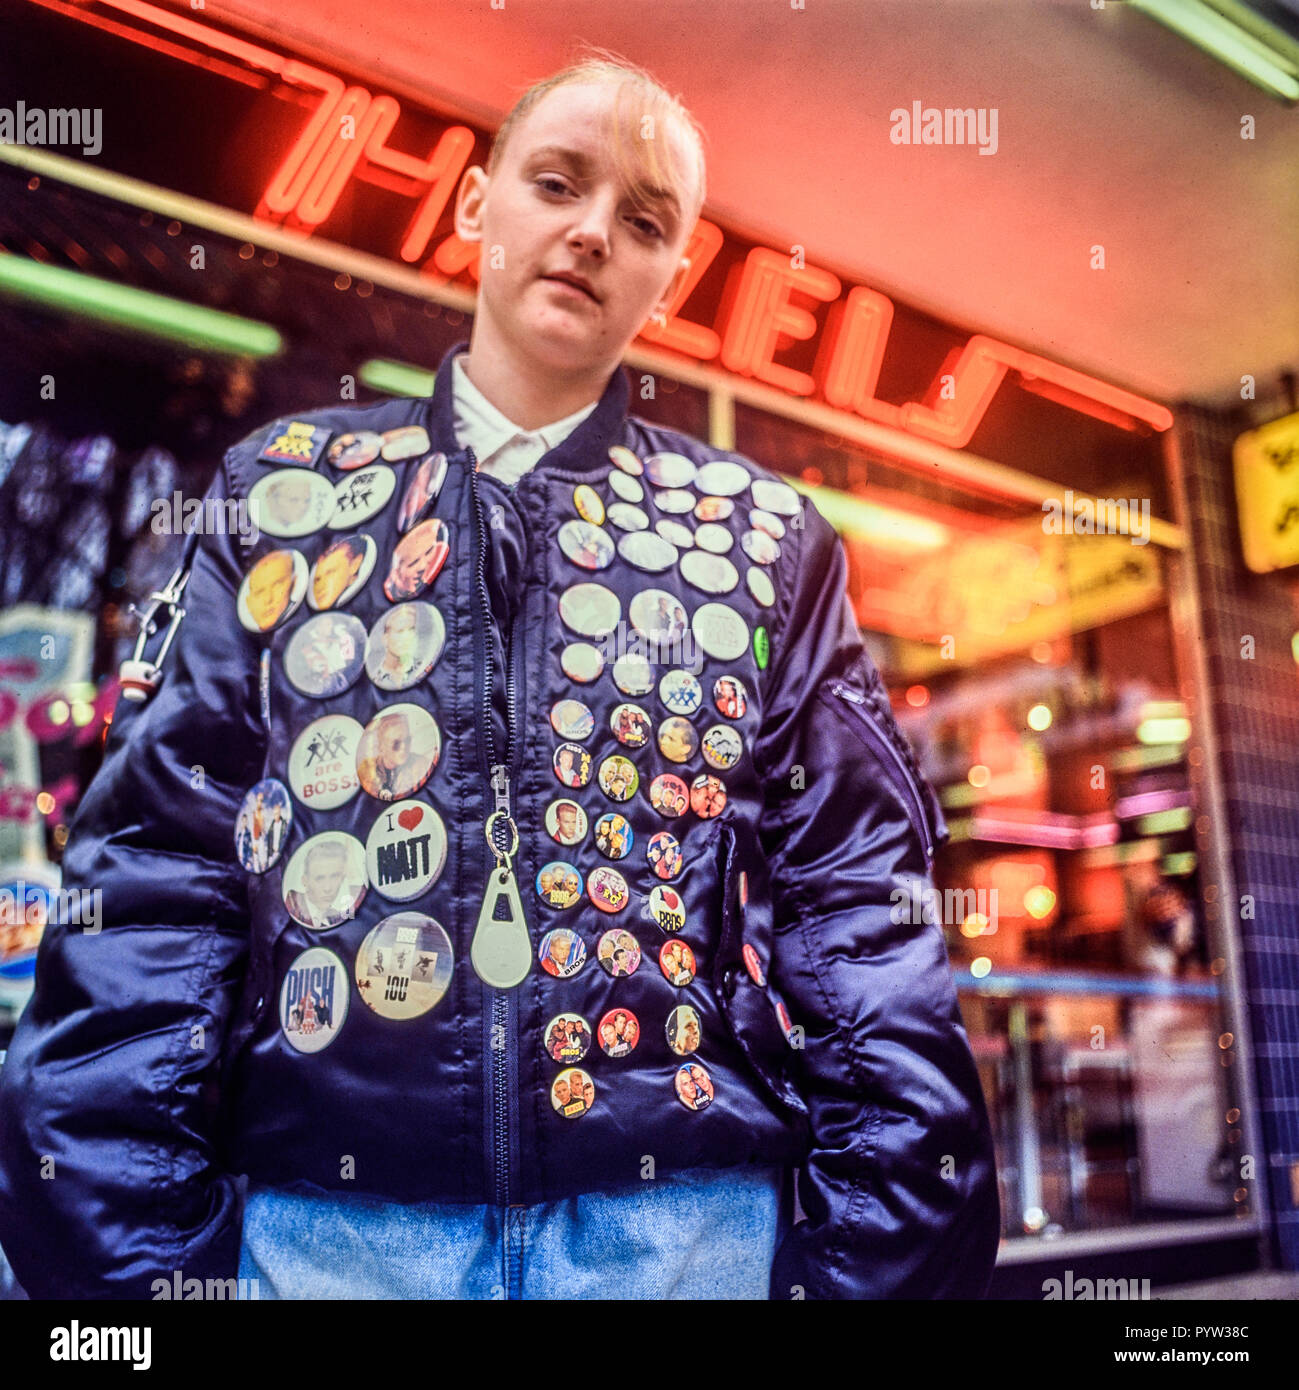 Manchester, England, Uk January 1989: A young girl poses outside a record shop with her many Bros boy band badges. Stock Photo